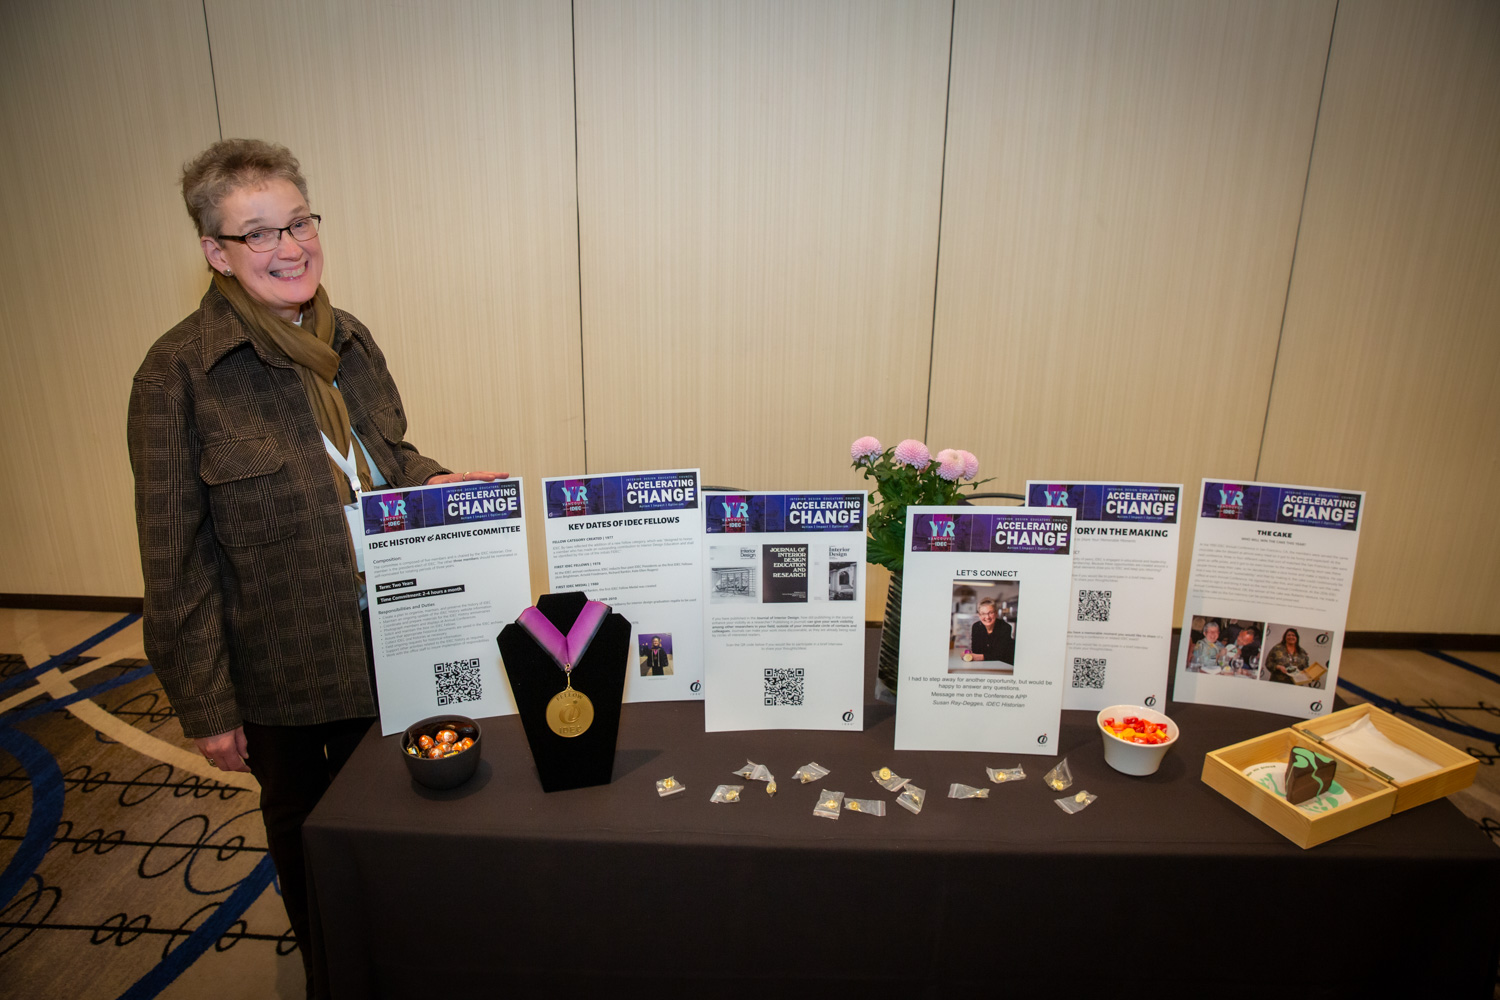 Woman smiling next to table of conference materials